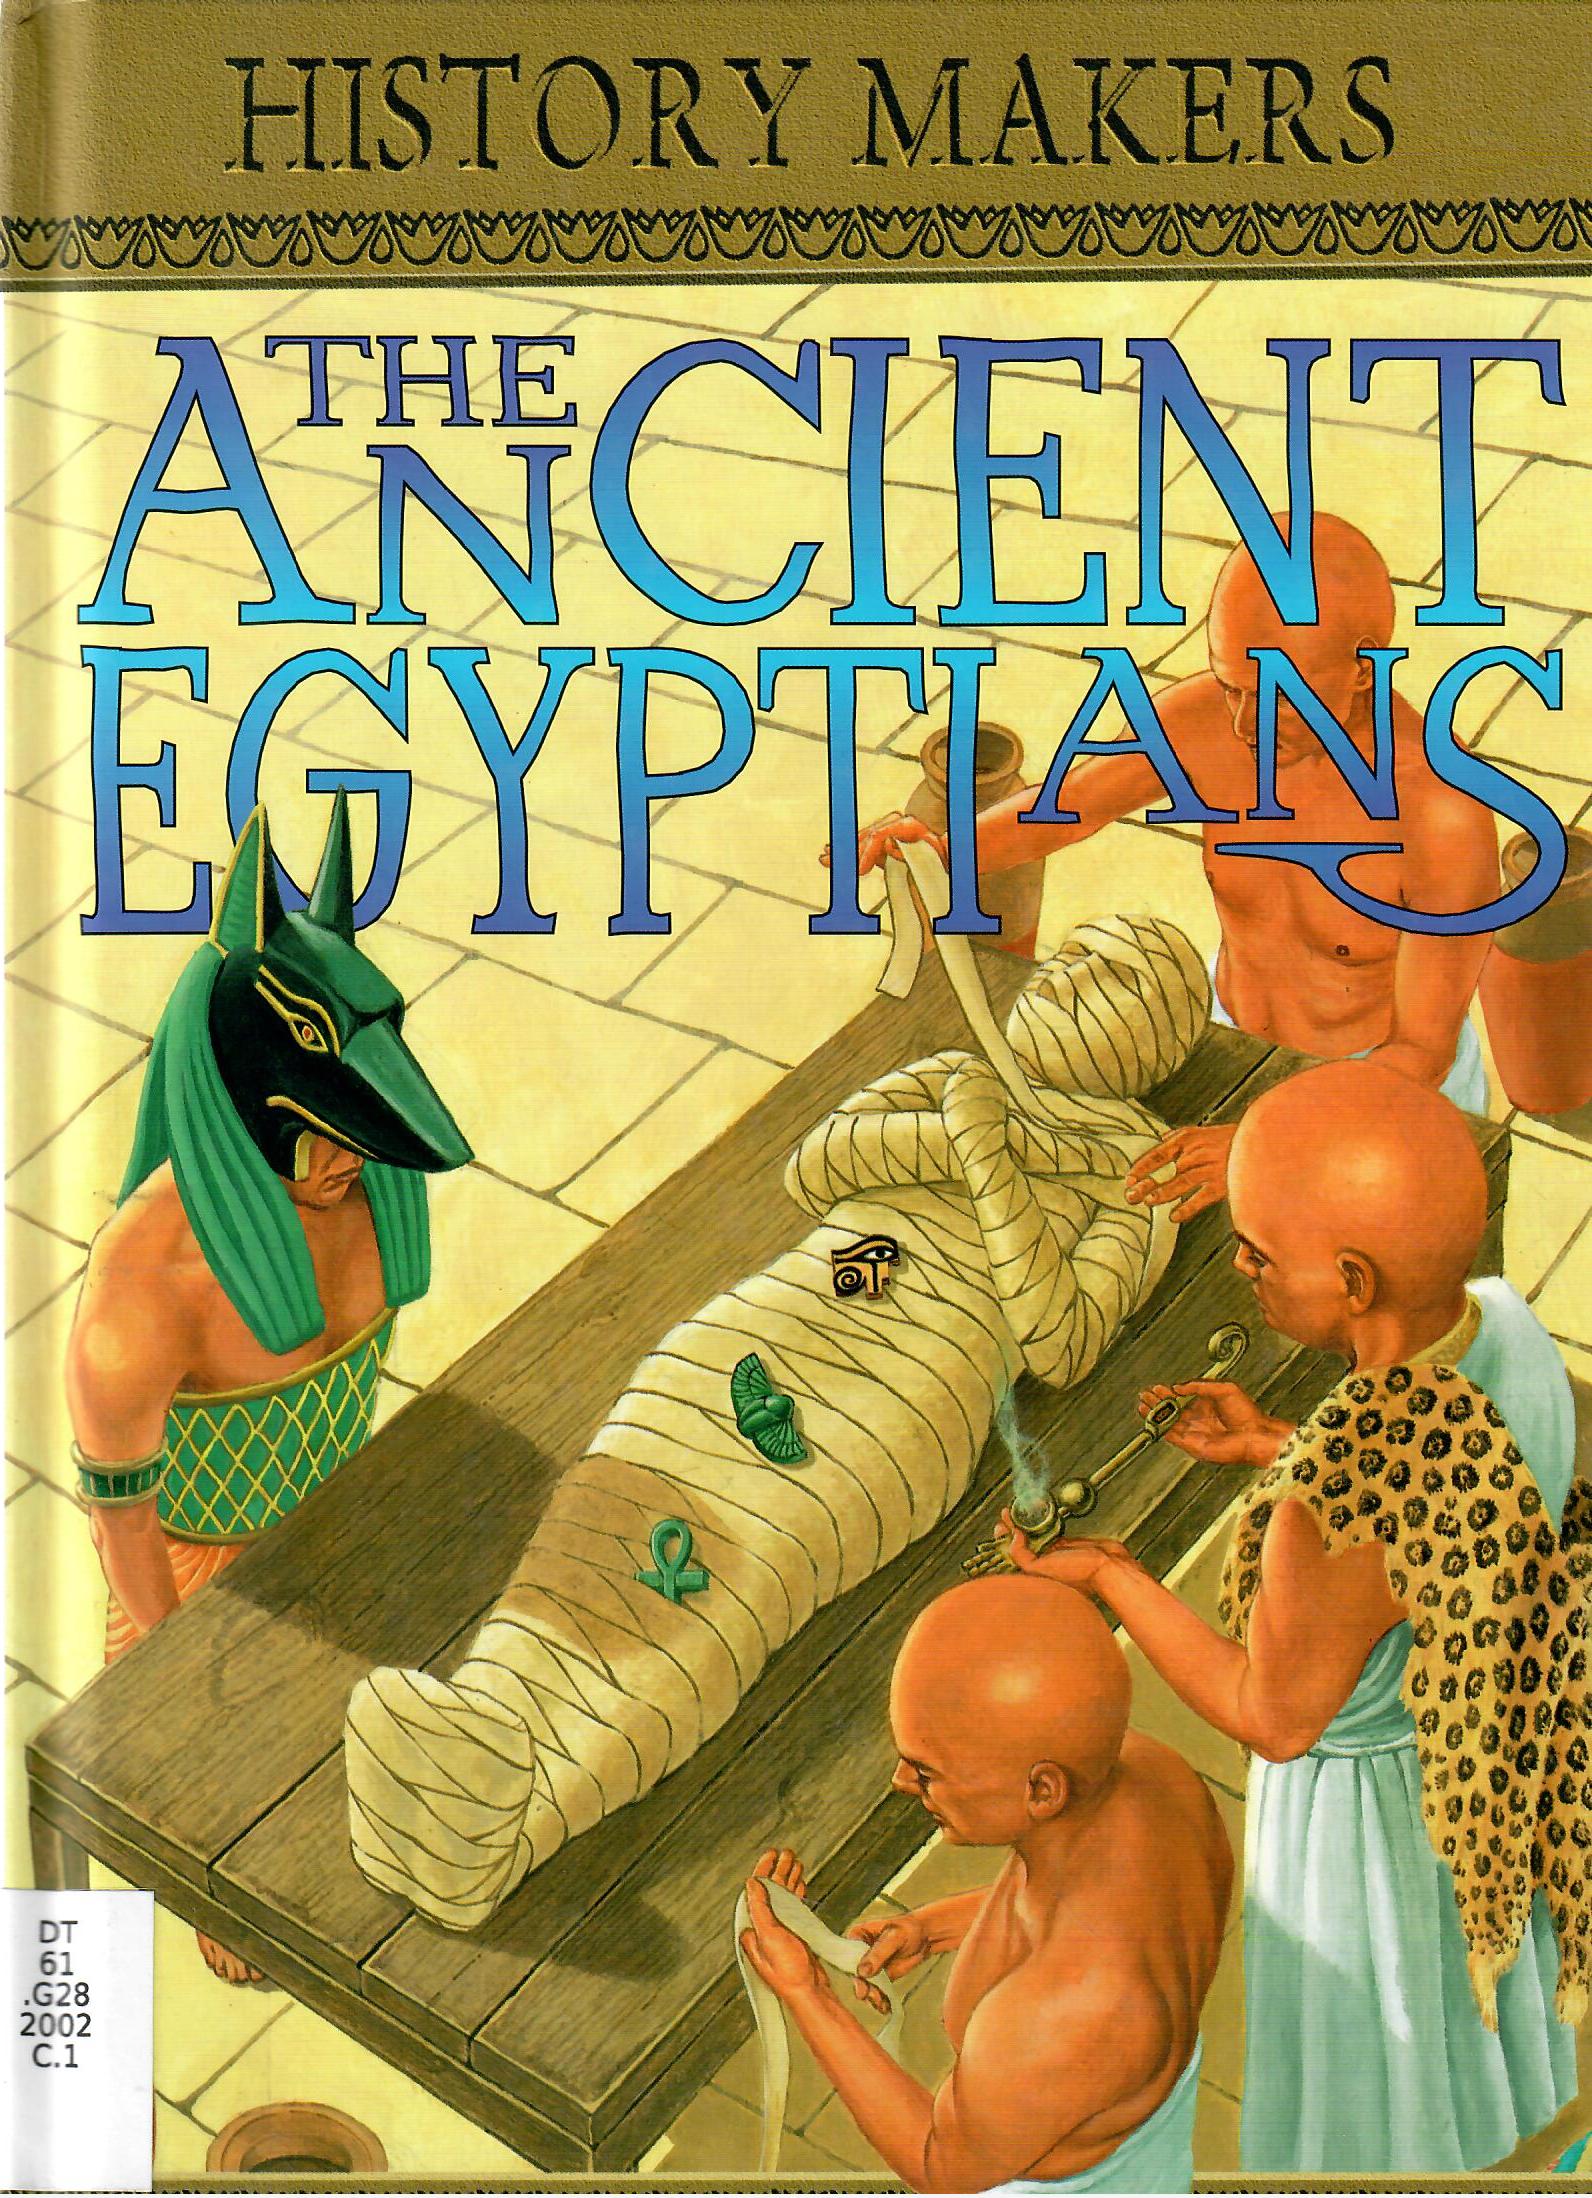 THE ANCIENT EGYPTIANS